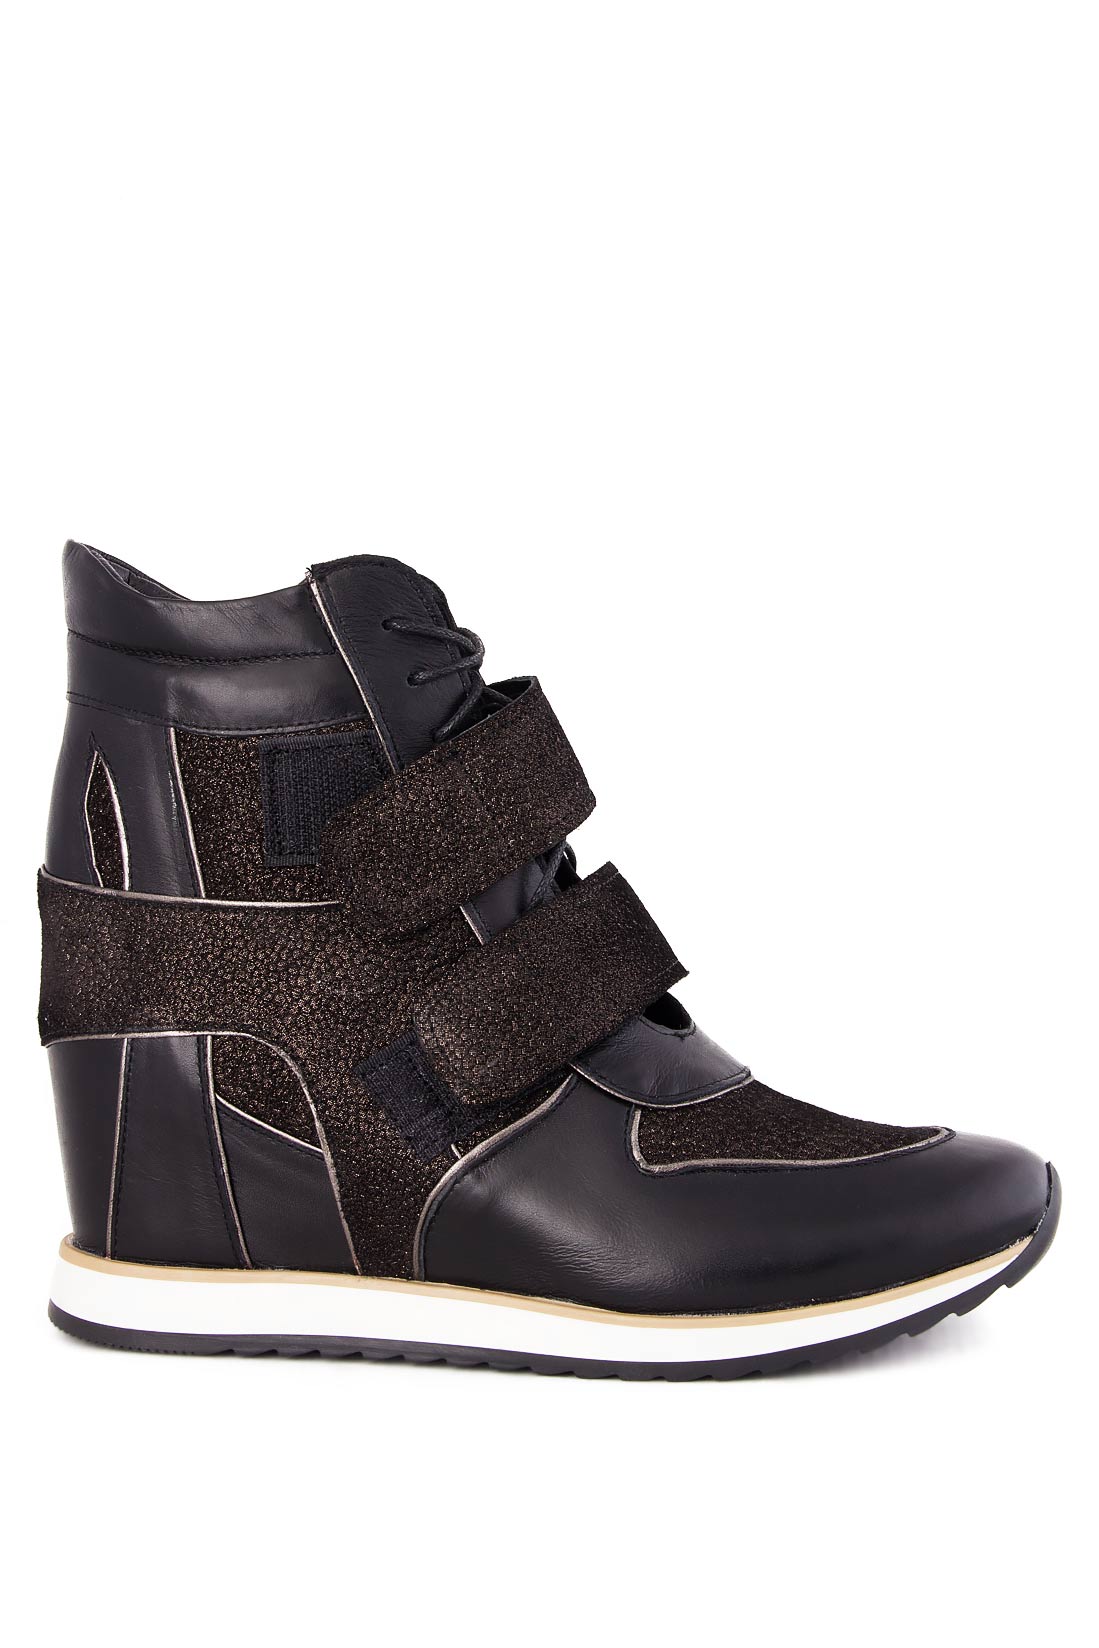 Suede and leather wedge sneakers Ana Kaloni image 0